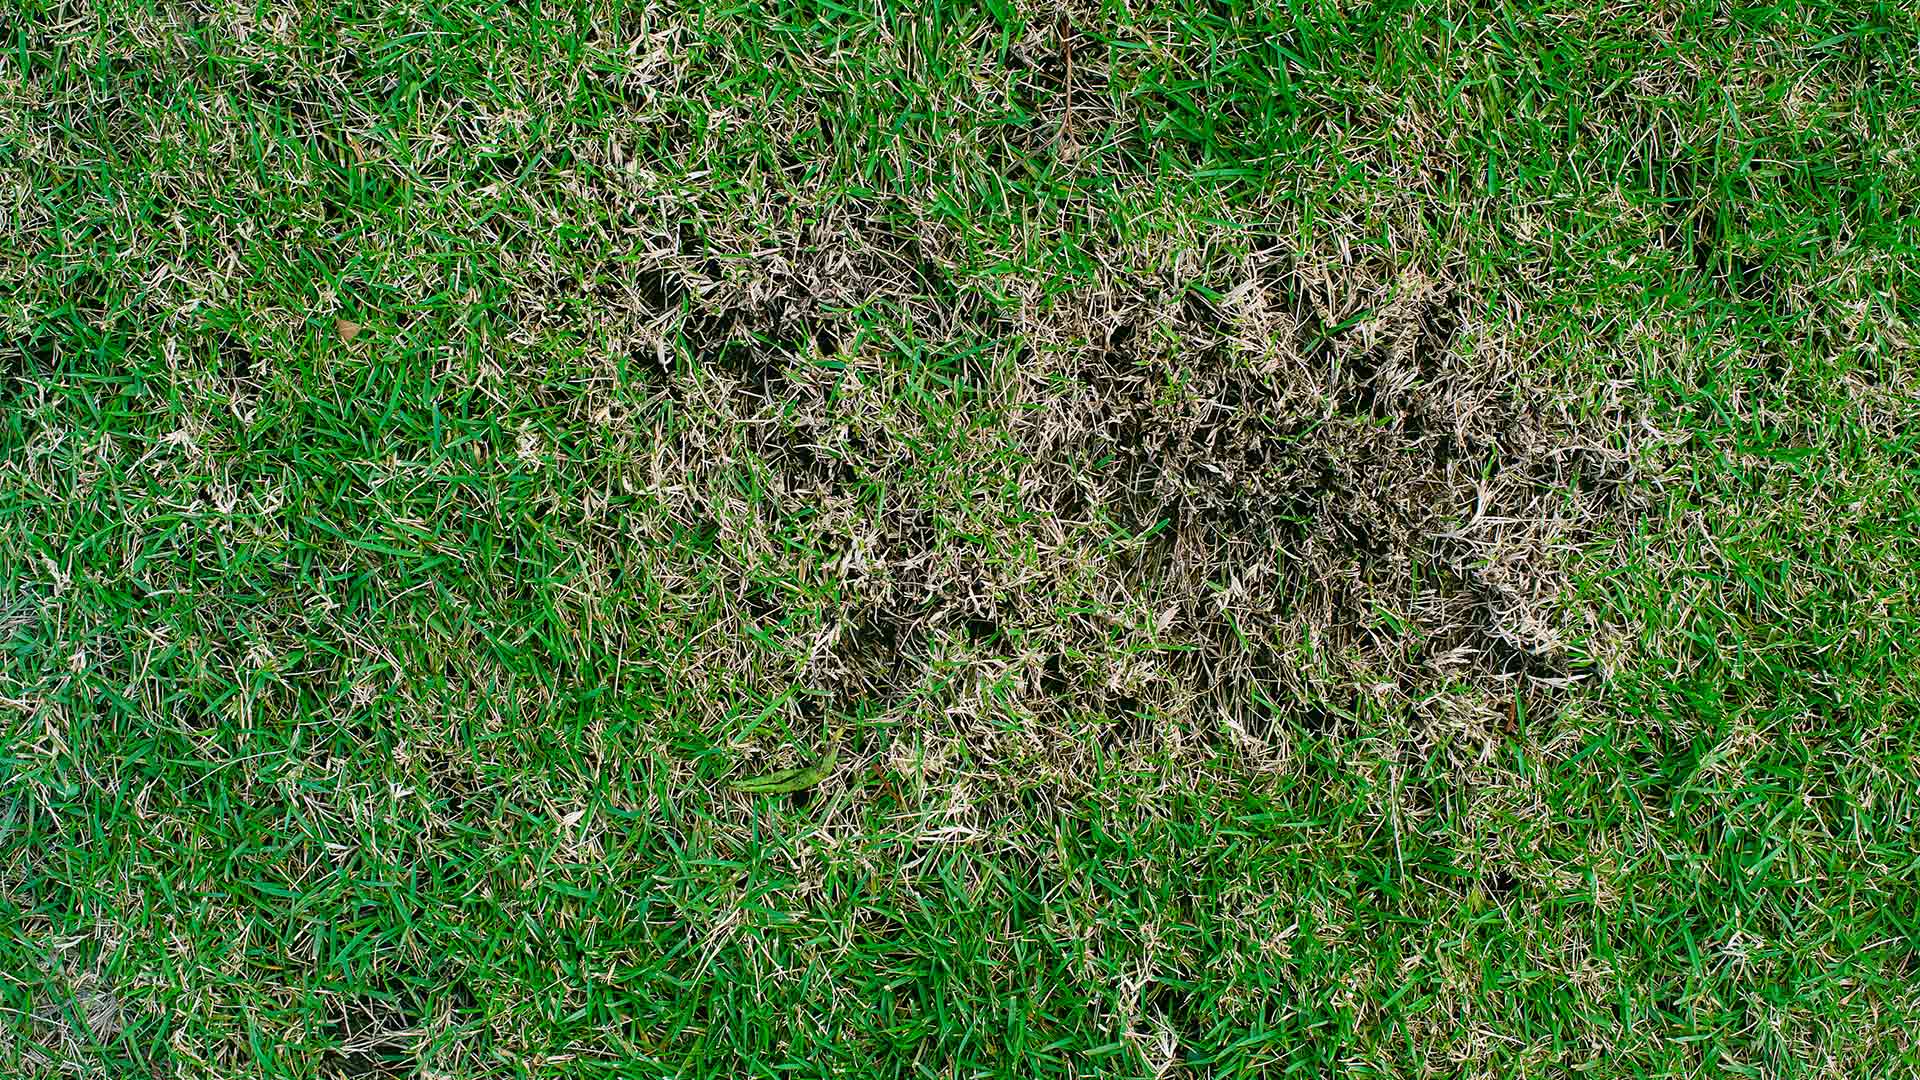 Take-All Root Rot - Here’s How to Deal With This Lawn Disease